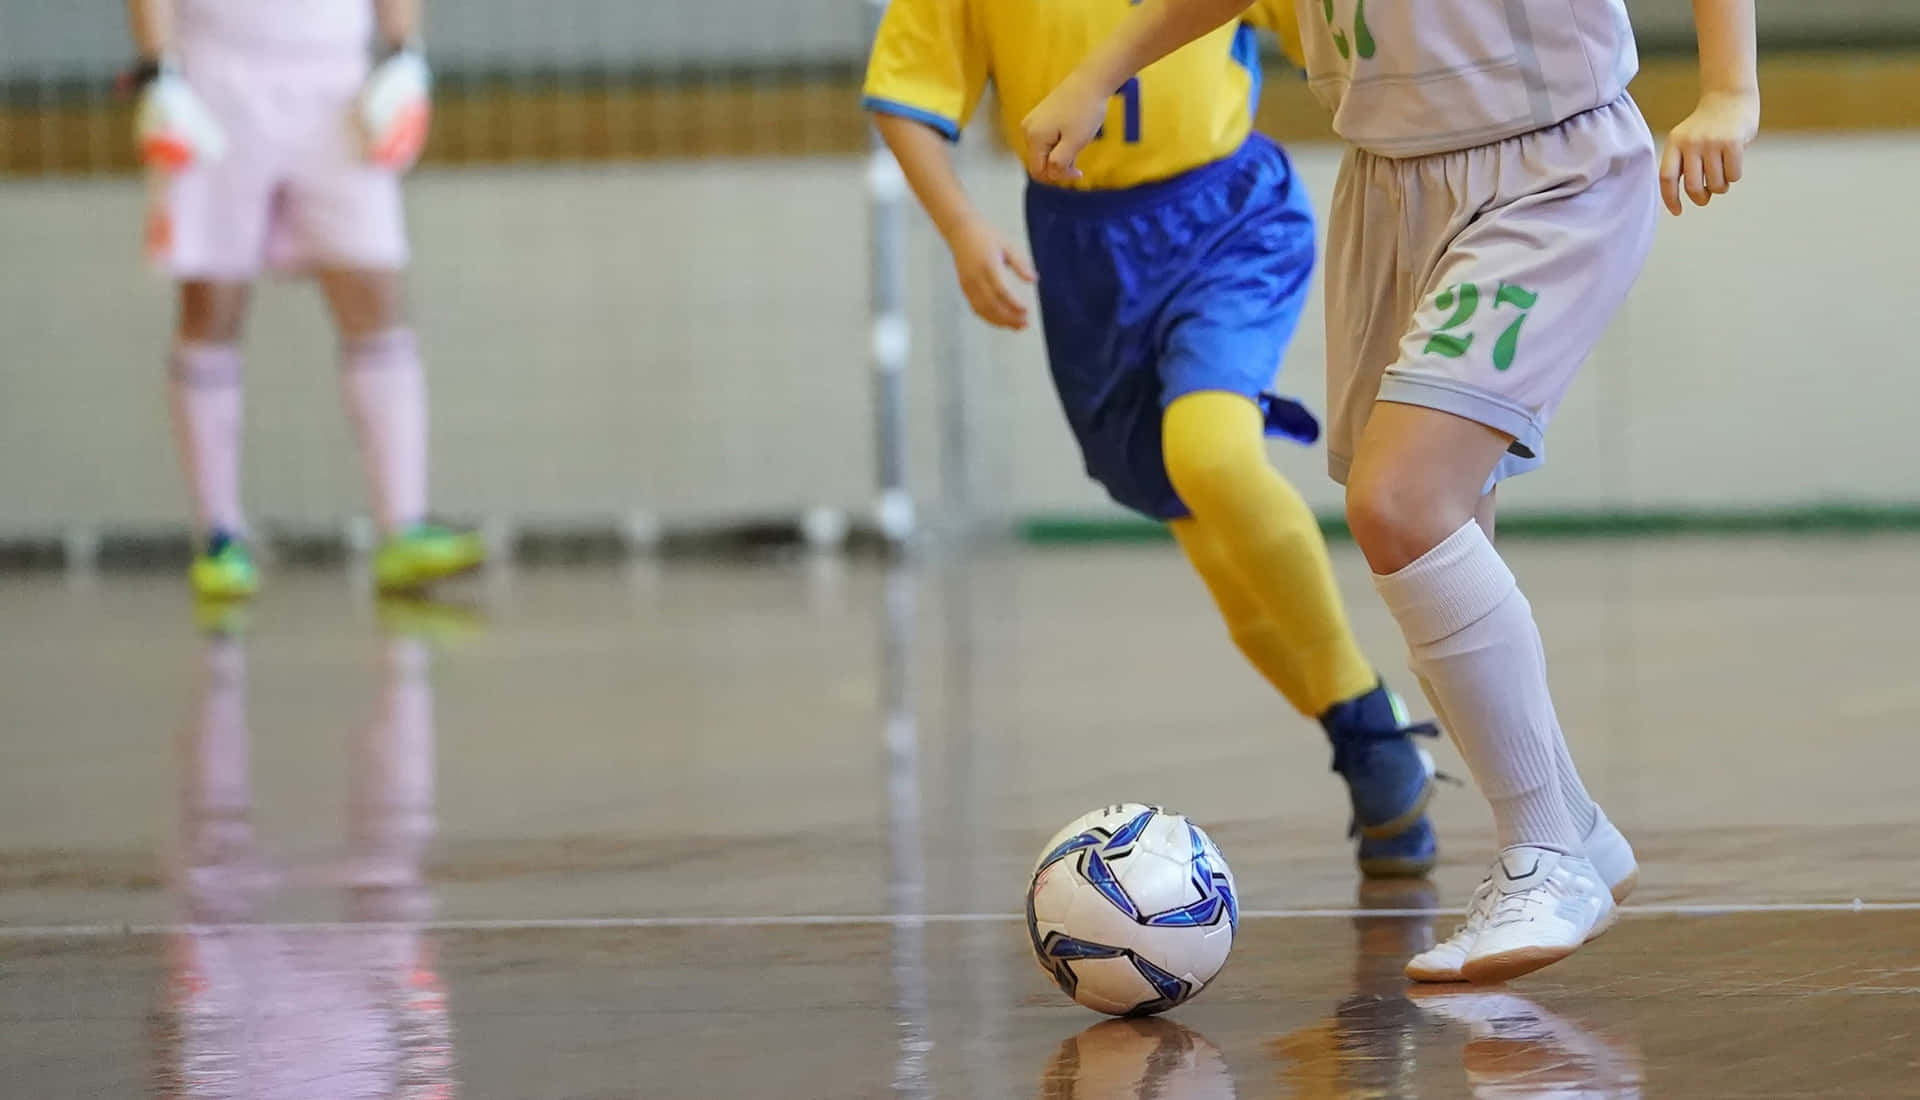 Competitive Indoor Soccer Action Wallpaper